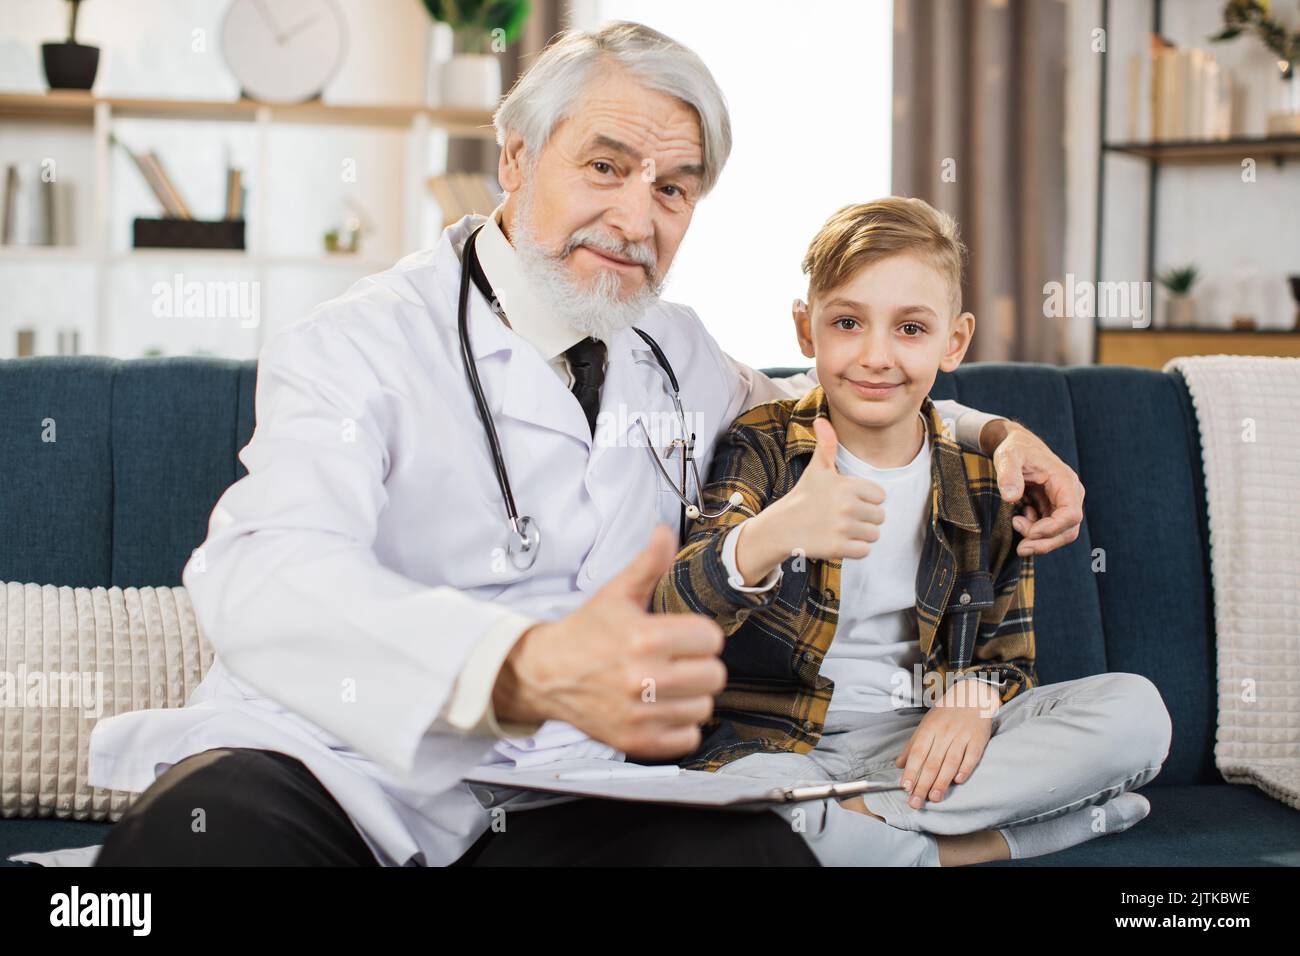 Mature man doctor in white coat and stethoscope on shoulders talking to sick boy patient, sitting on sofa, showing treatment plan, medication list, looking at camera and showing thumb up. Stock Photo